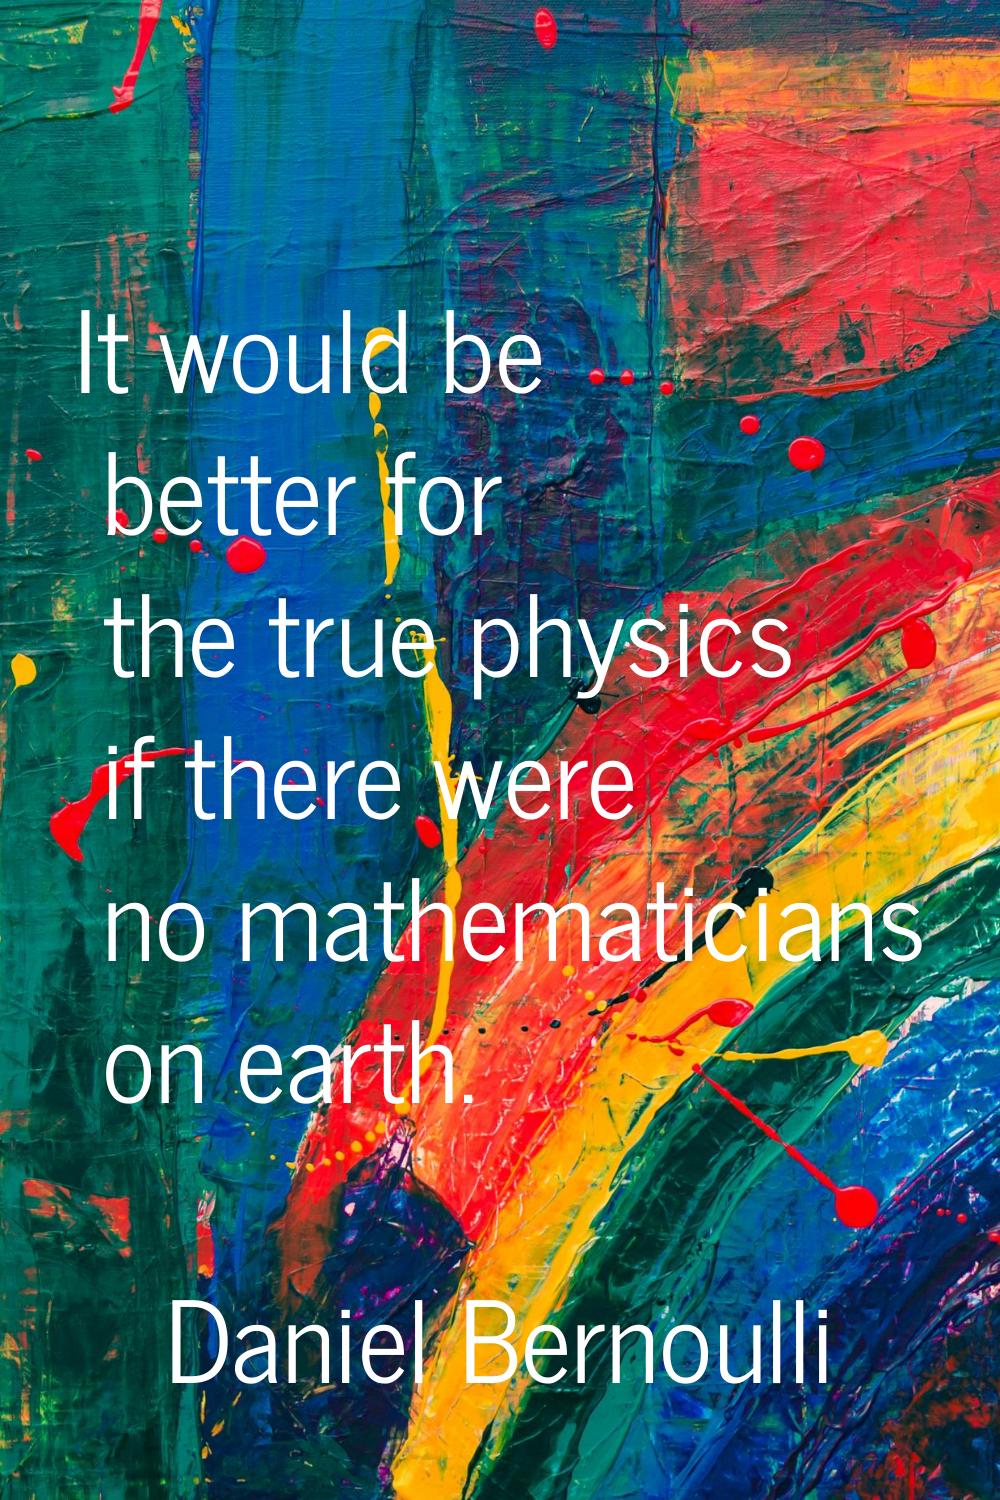 It would be better for the true physics if there were no mathematicians on earth.